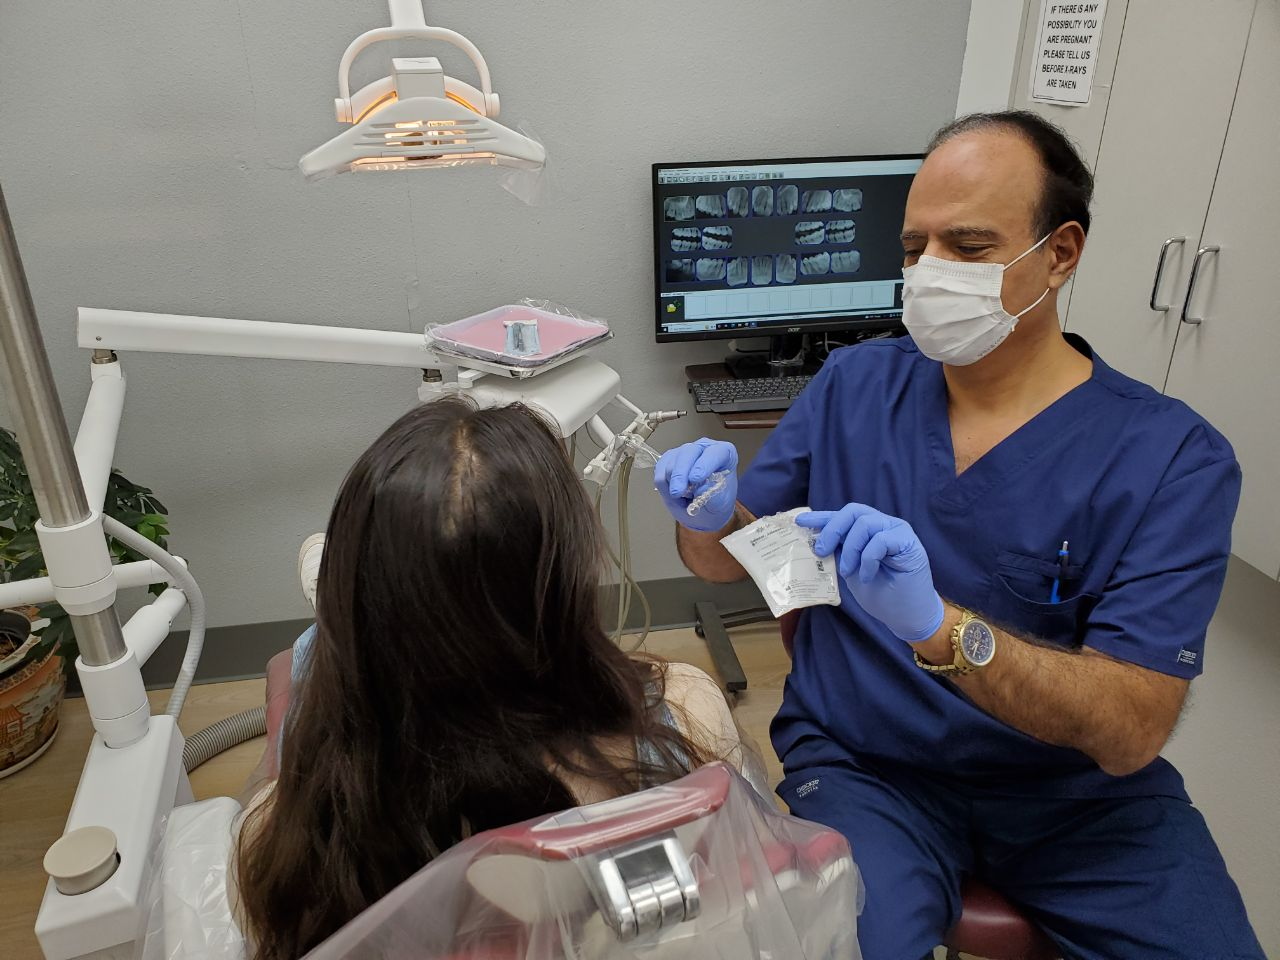 Dr. Khanina from All Smiles Family Dentistry showing Invisalign to a female patient